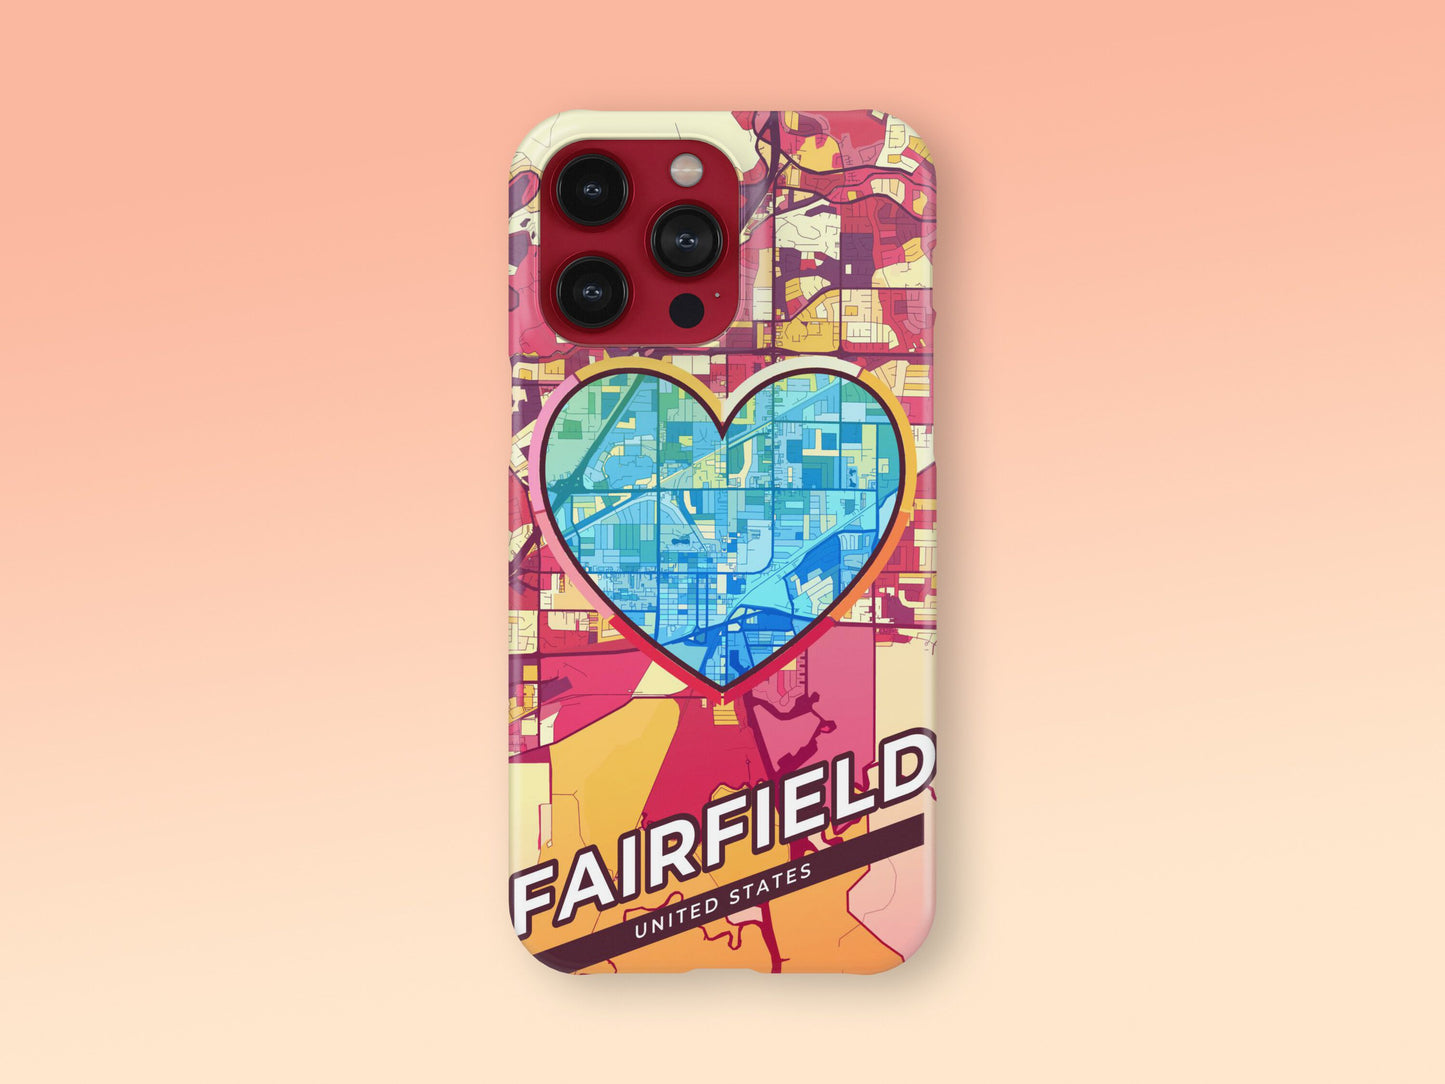 Fairfield California slim phone case with colorful icon. Birthday, wedding or housewarming gift. Couple match cases. 2